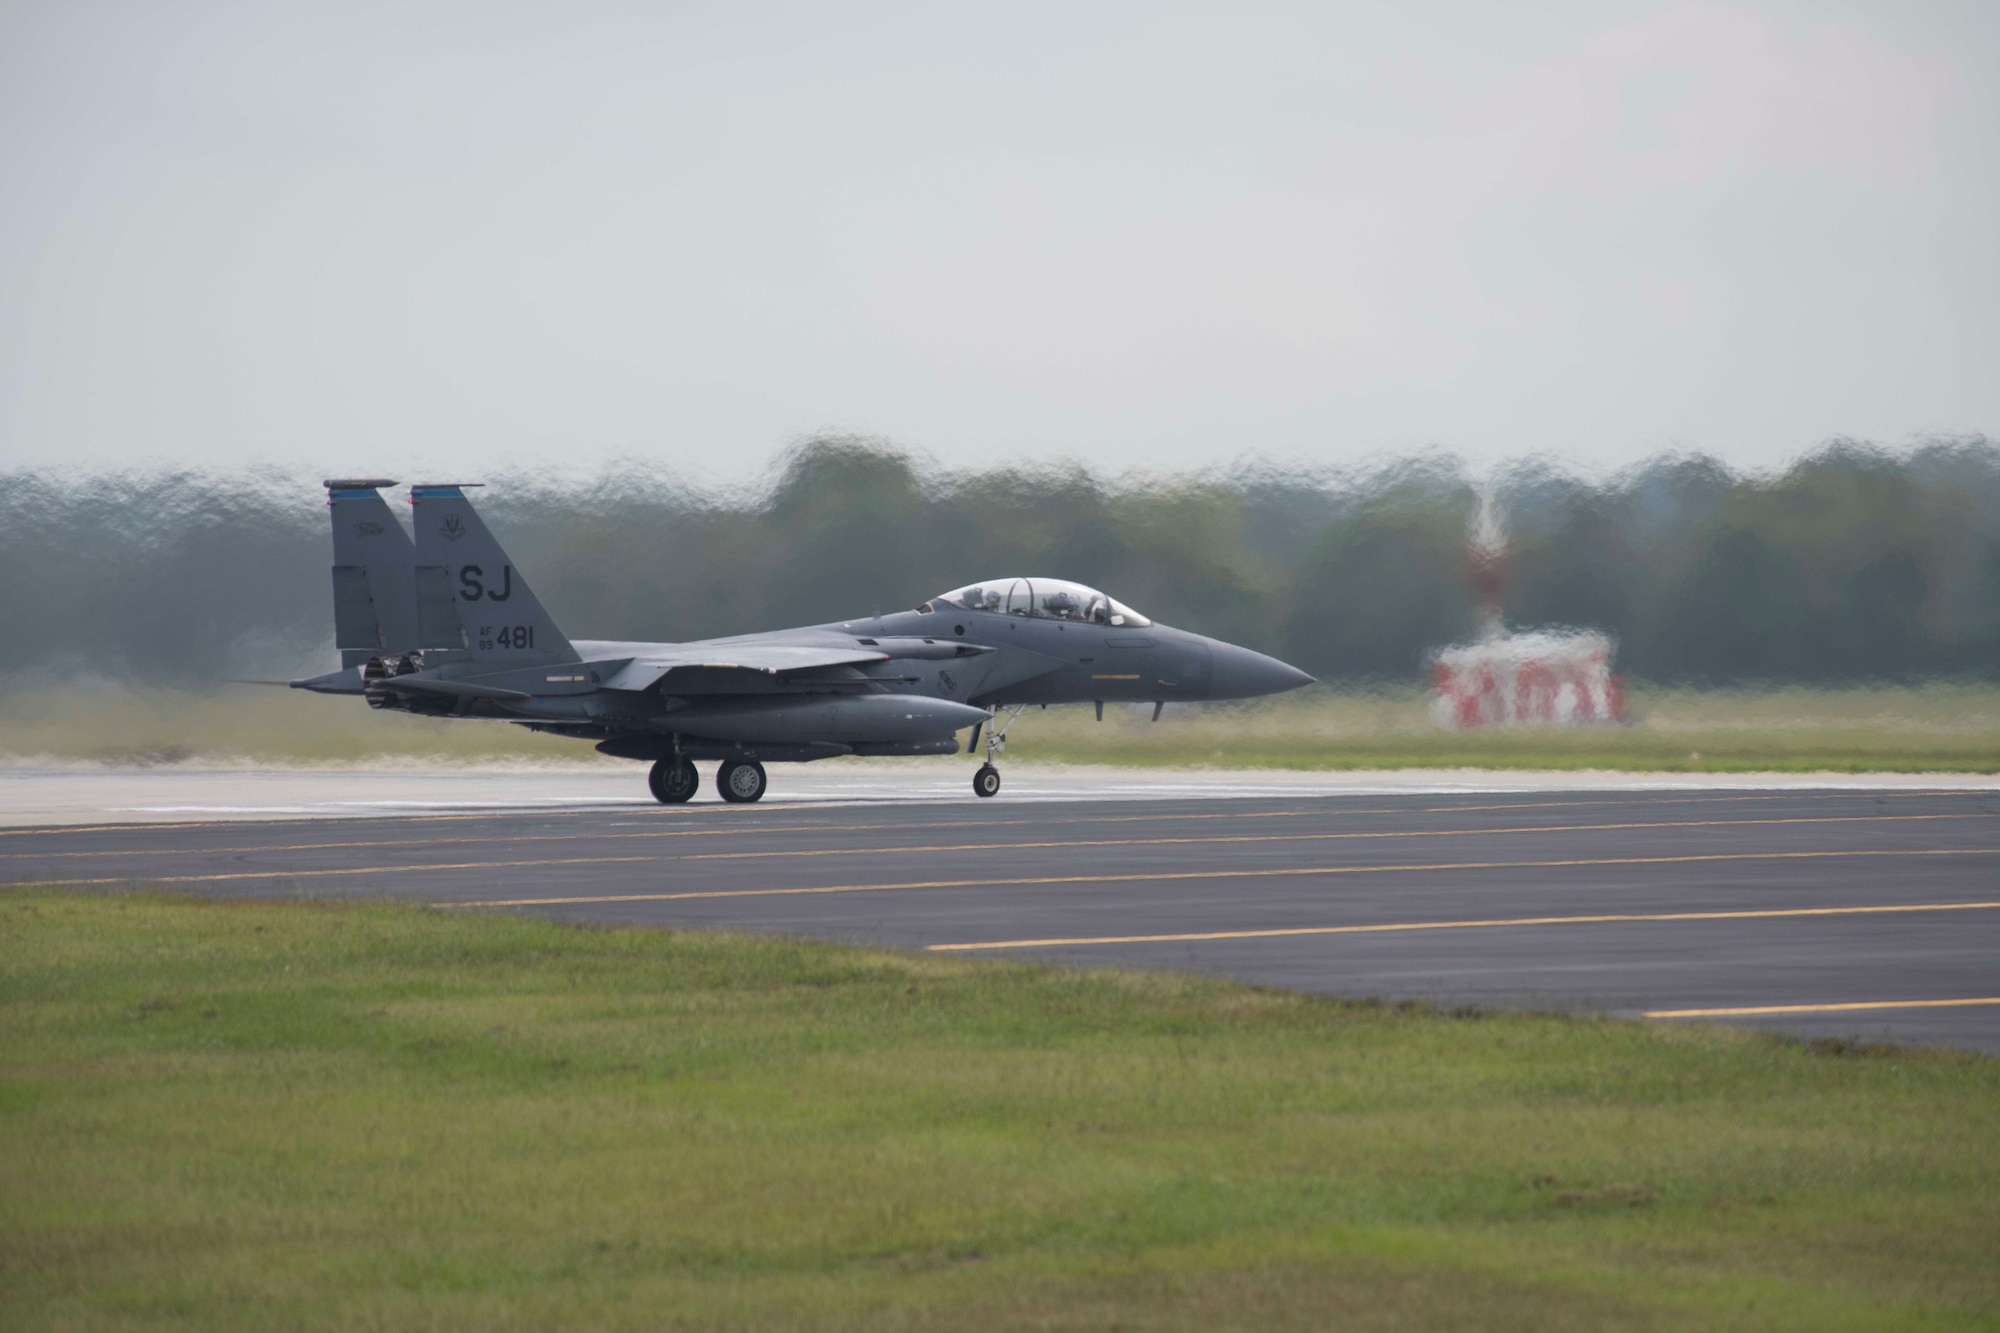 An F-15E Strike Eagle prepares to takeoff during a repositioning in advance of Hurricane Dorian, September 4, 2019, at Seymour Johnson Air Force Base, North Carolina. More than 30 aircraft were repositioned to Tinker AFB, Oklahoma, as a precautionary measure to avoid severe weather associated with Hurricane Dorian. (U.S. Air Force photo by Senior Airman Kenneth Boyton)